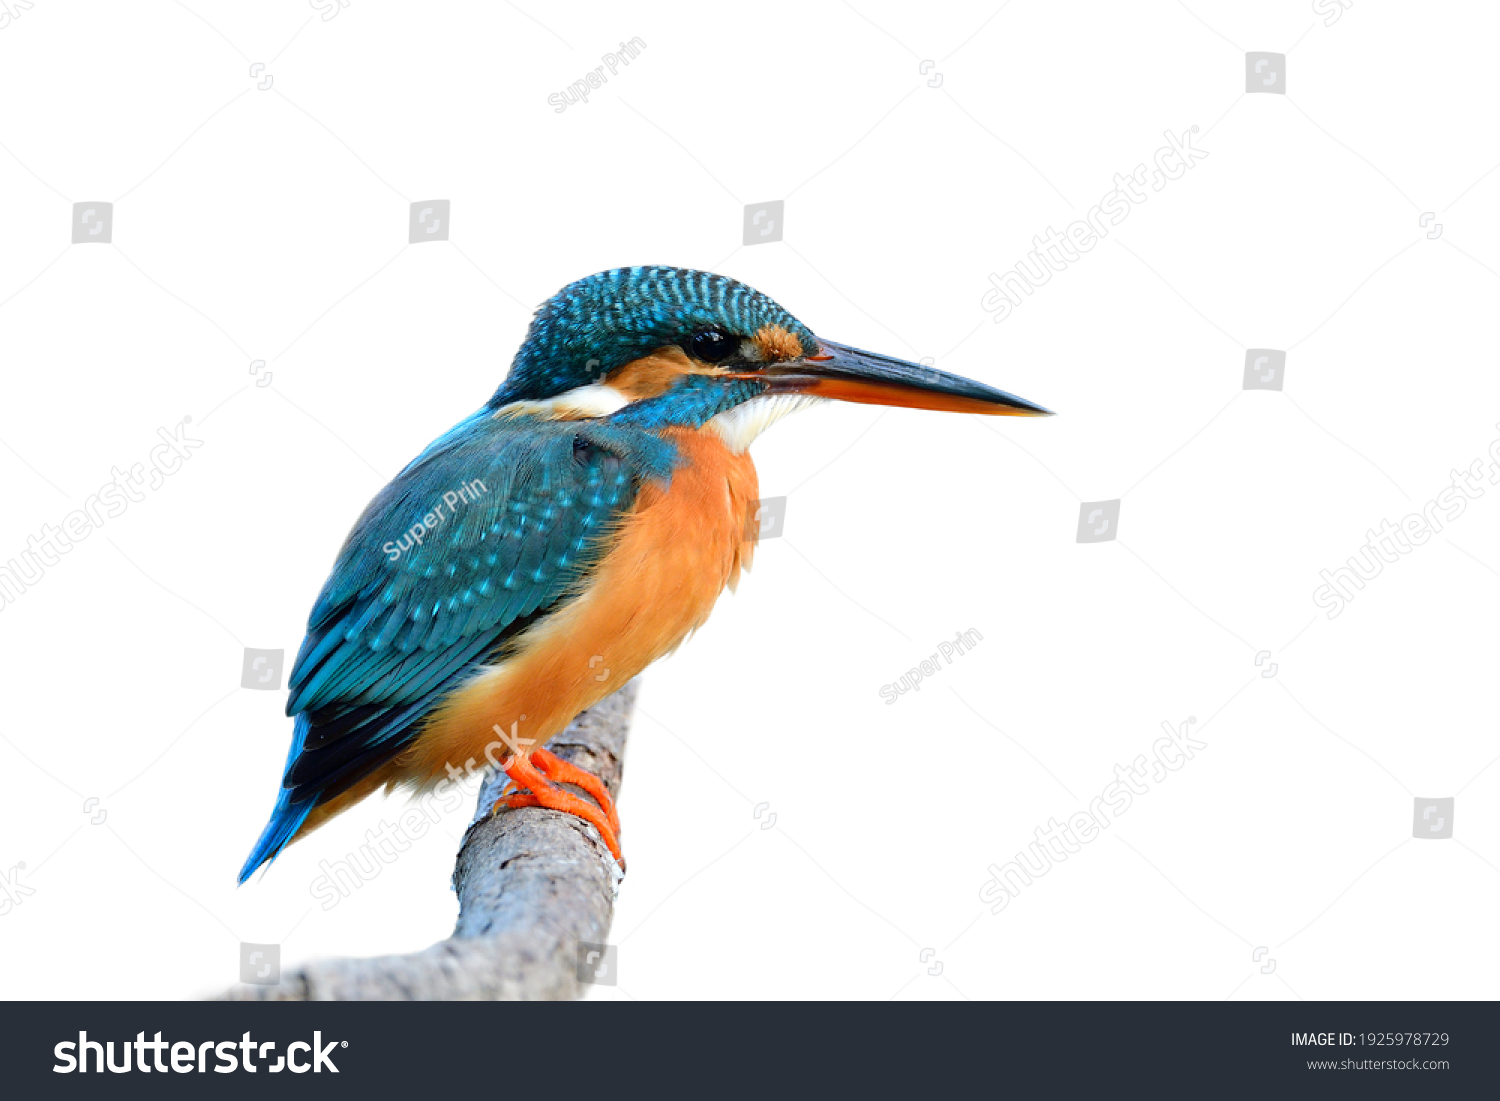 Turqouise Blue bird with black and red beaks calmly perching on wooden branch isolated on white background, common kingfisher (Alcedo atthis) #1925978729